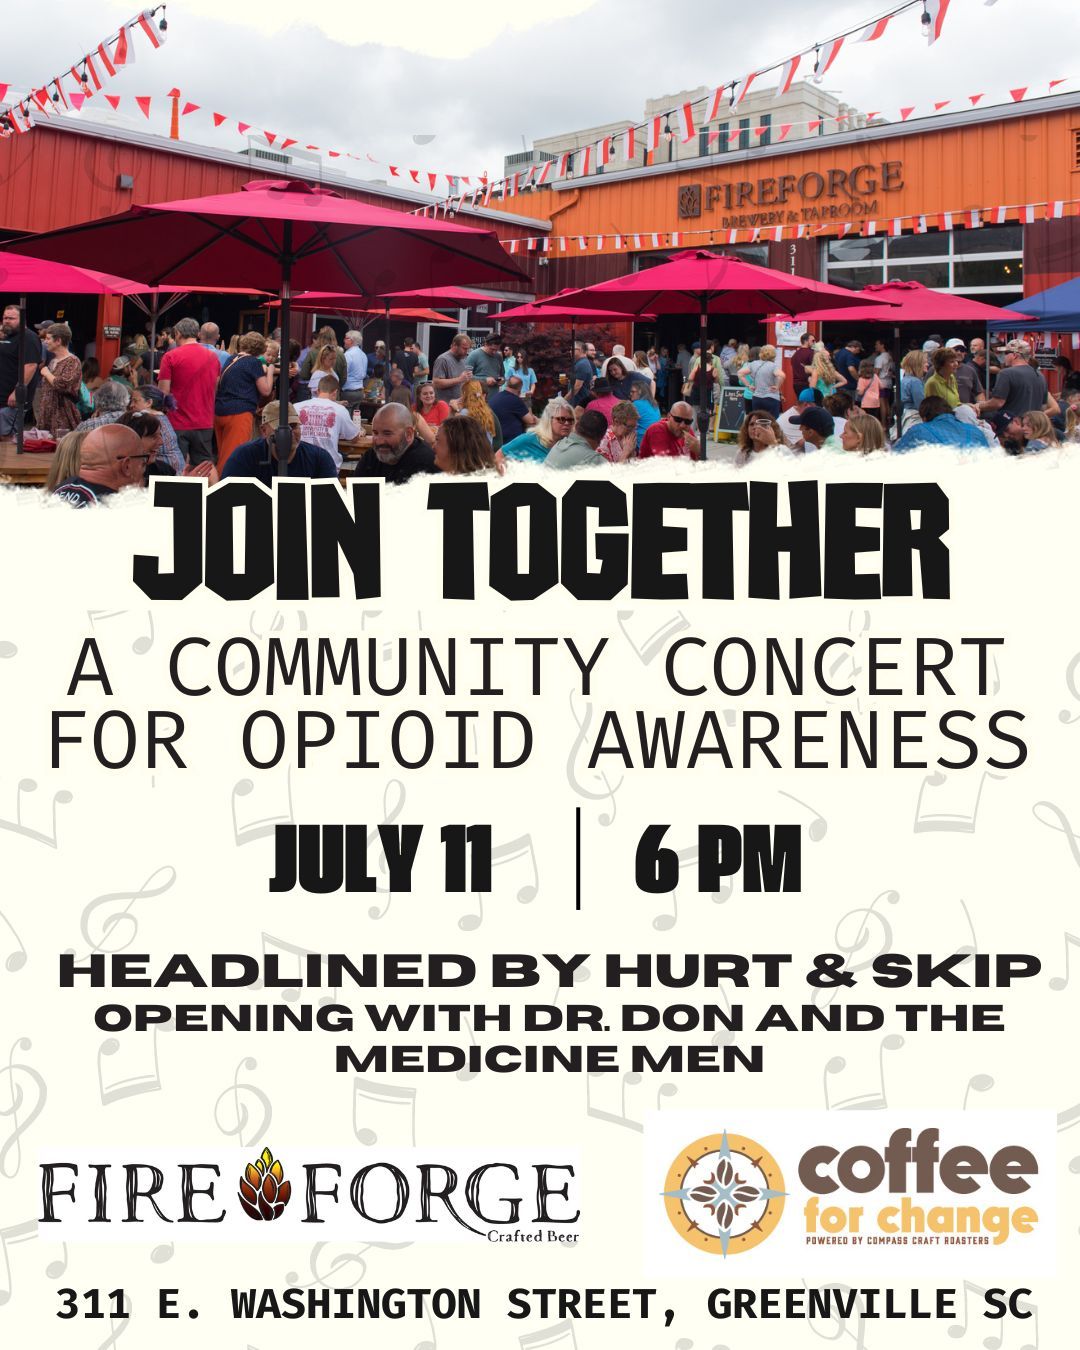 Join Together - A Community Concert for Opioid Awareness